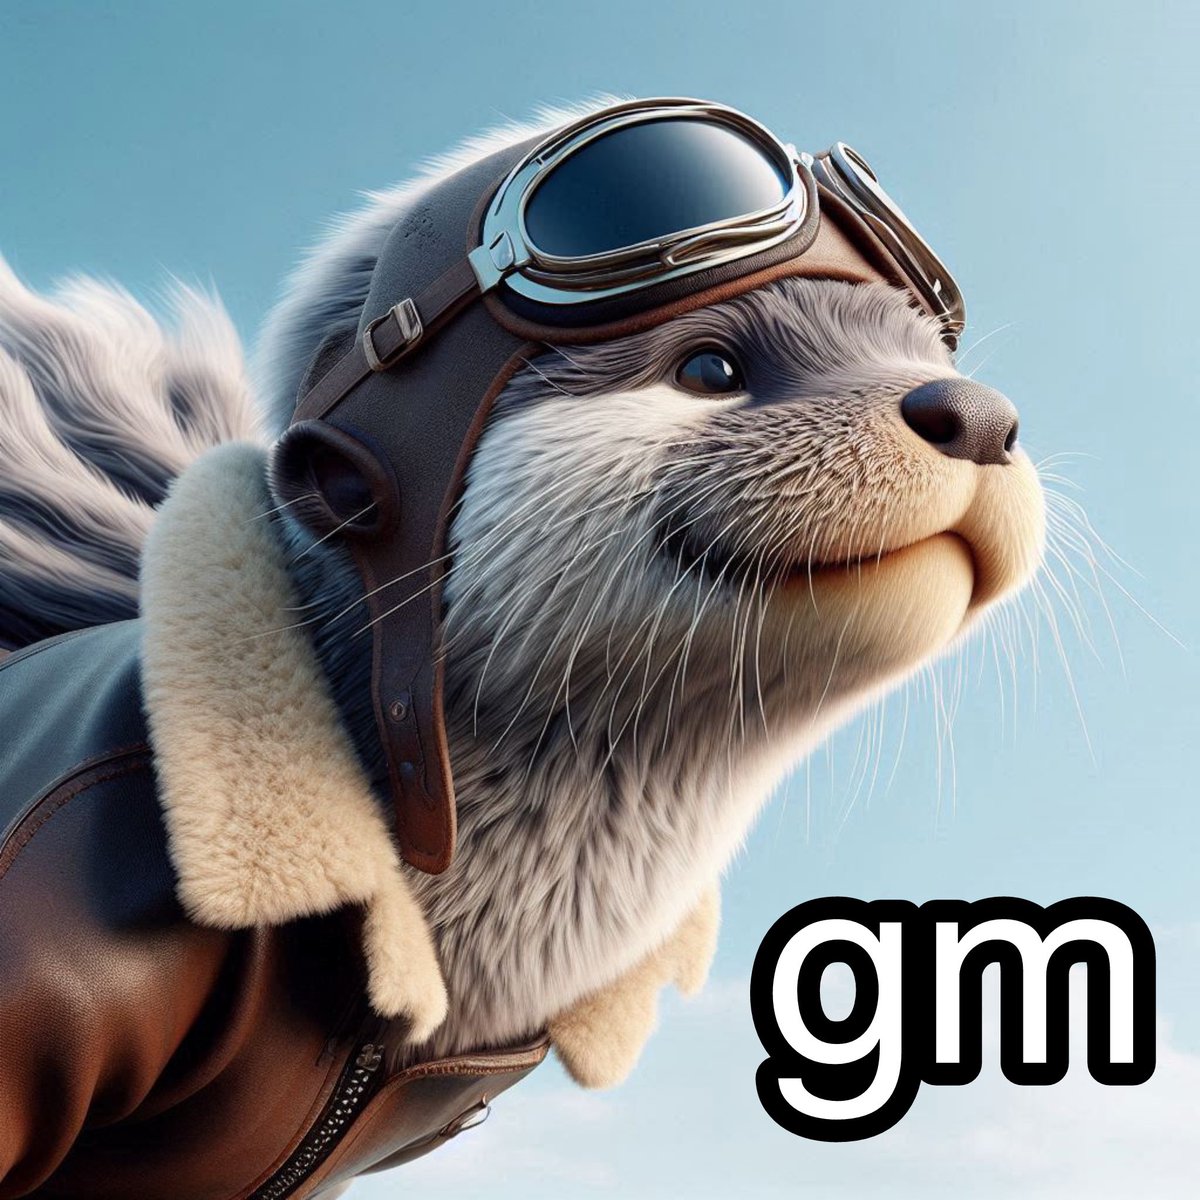 gm fam! ✈️🦦🌊

have an otterly ottsome day!